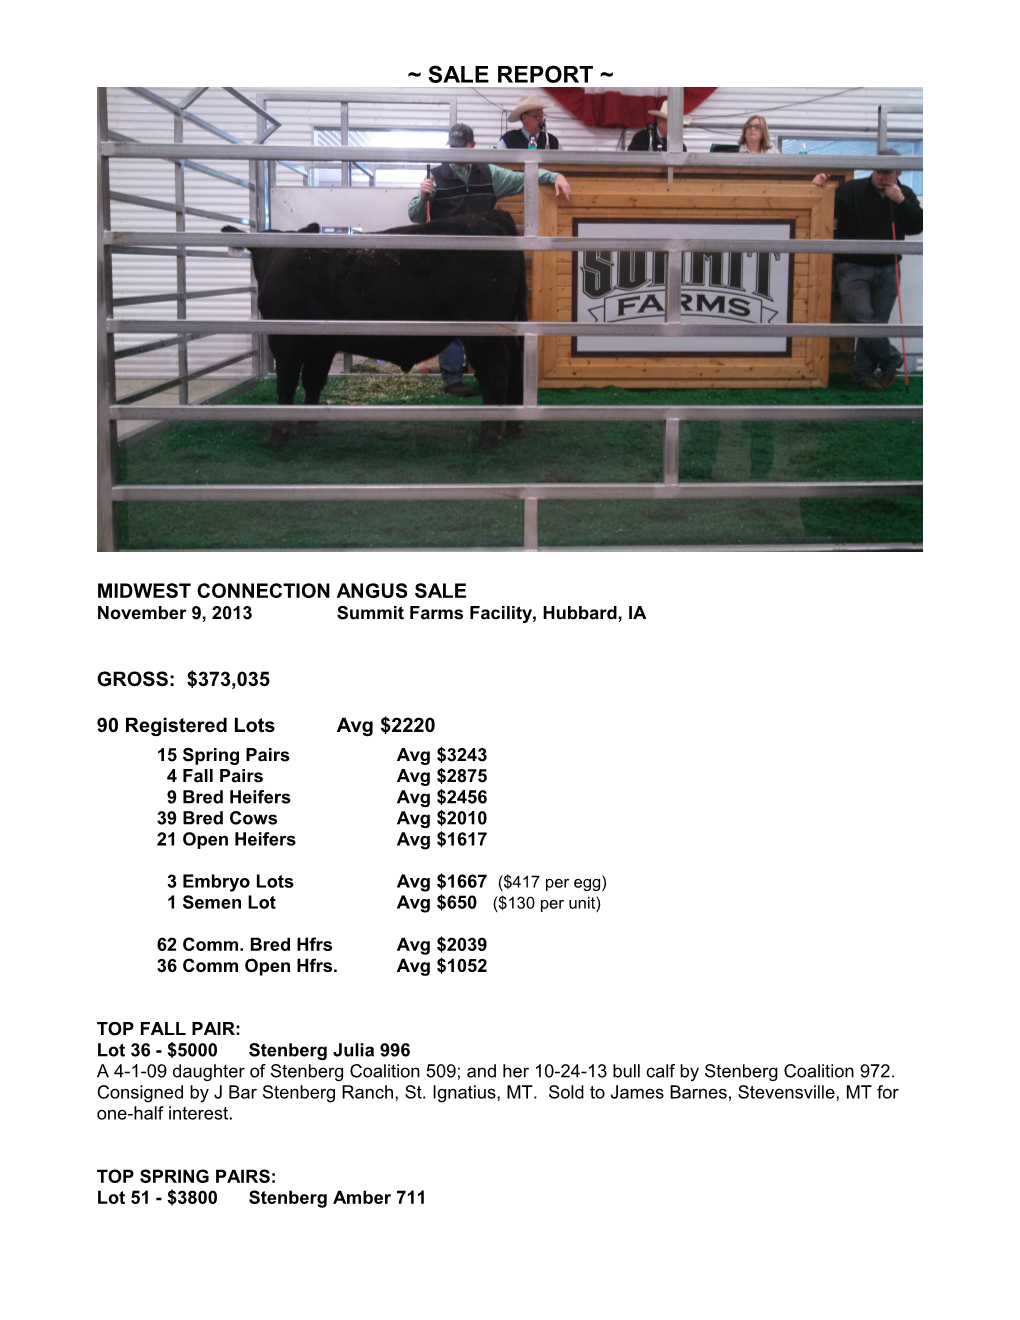 Midwest Connection Angus Sale